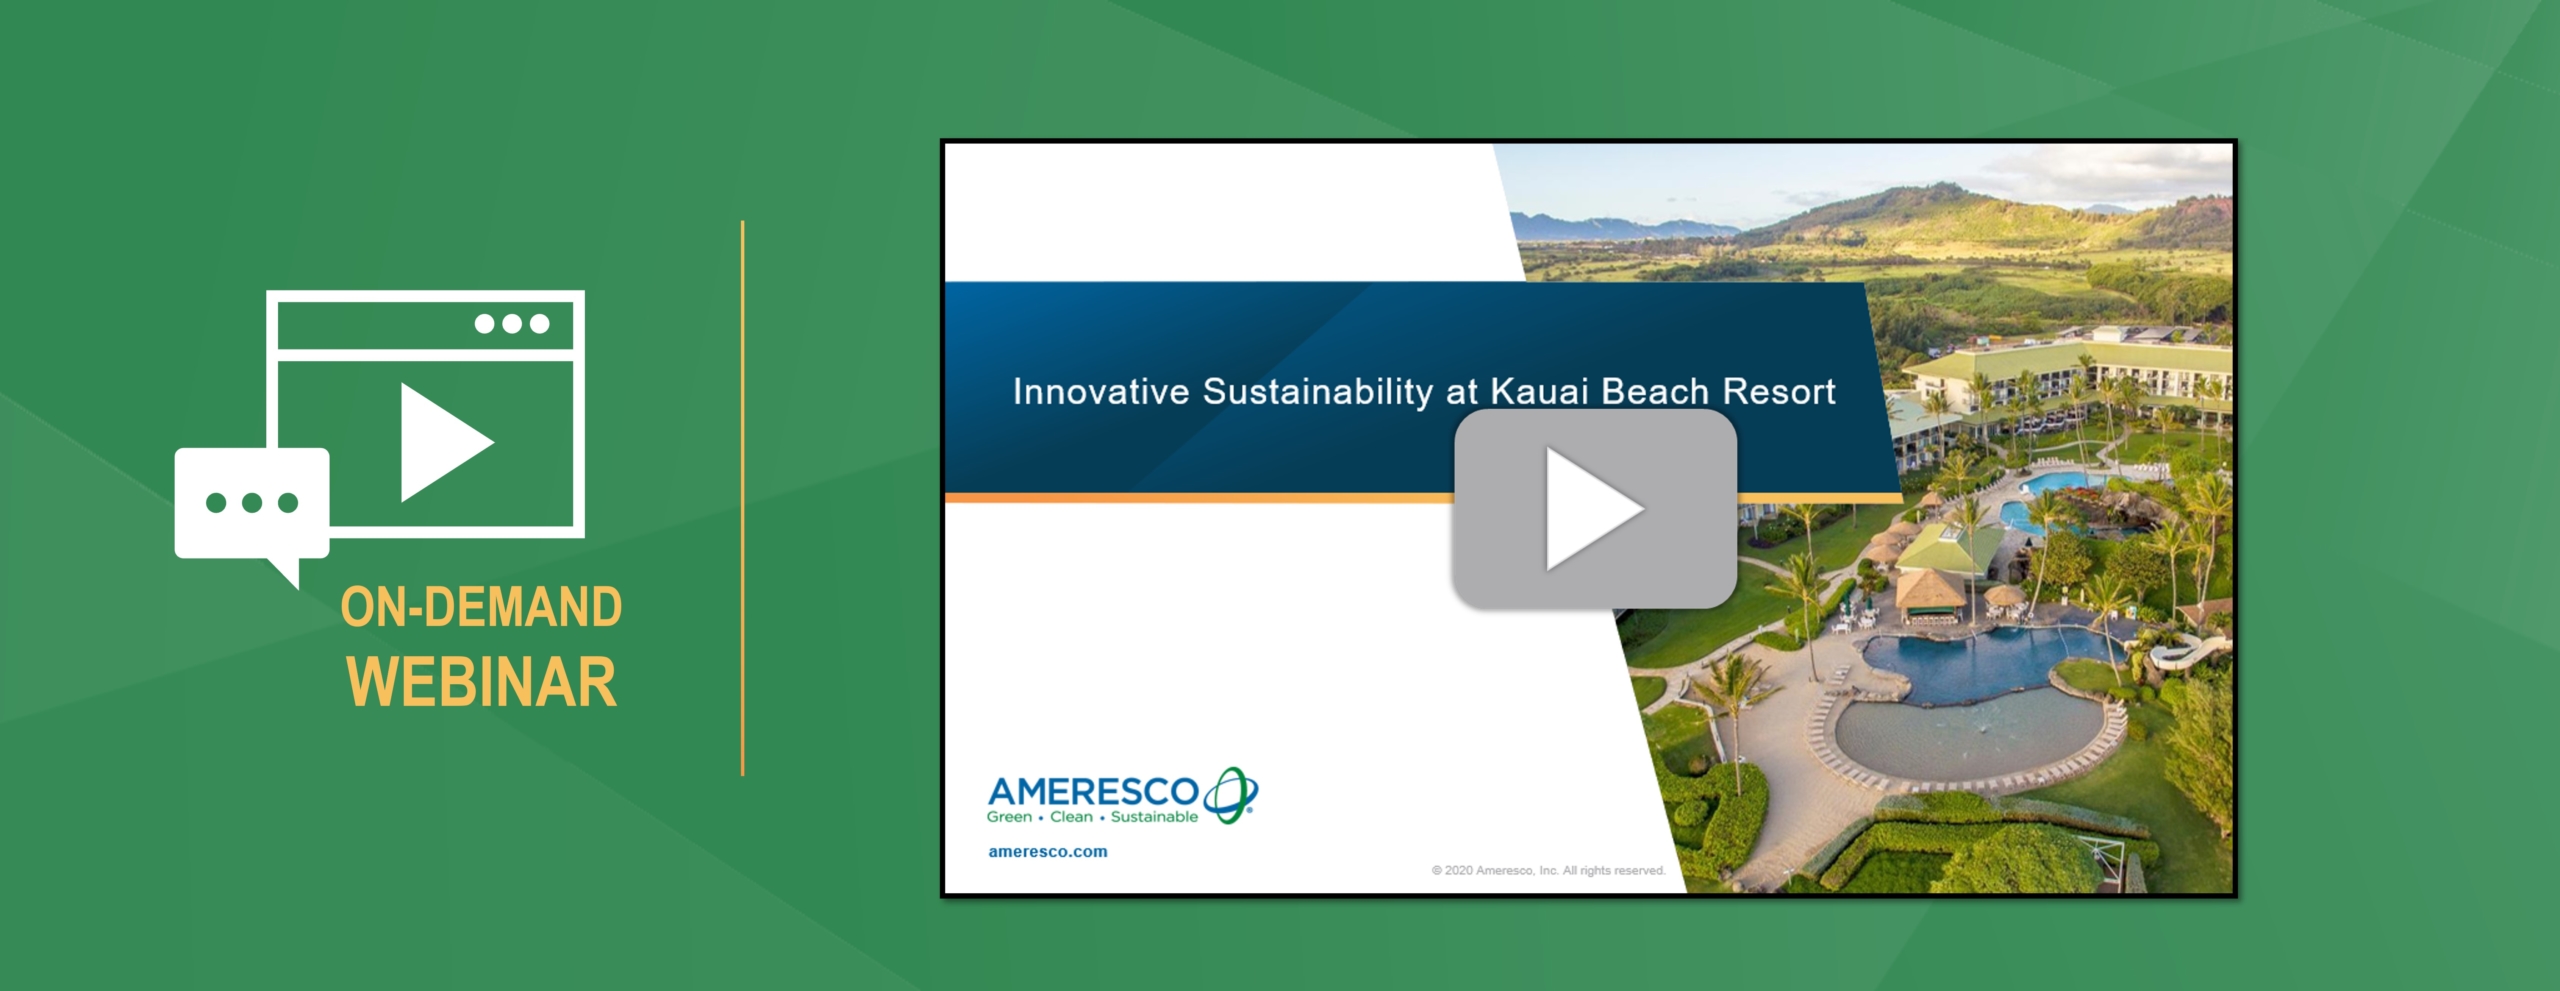 Preview image for the Innovative Sustainability at Kauai Beach Resort webinar next to the words On-Demand Webinar